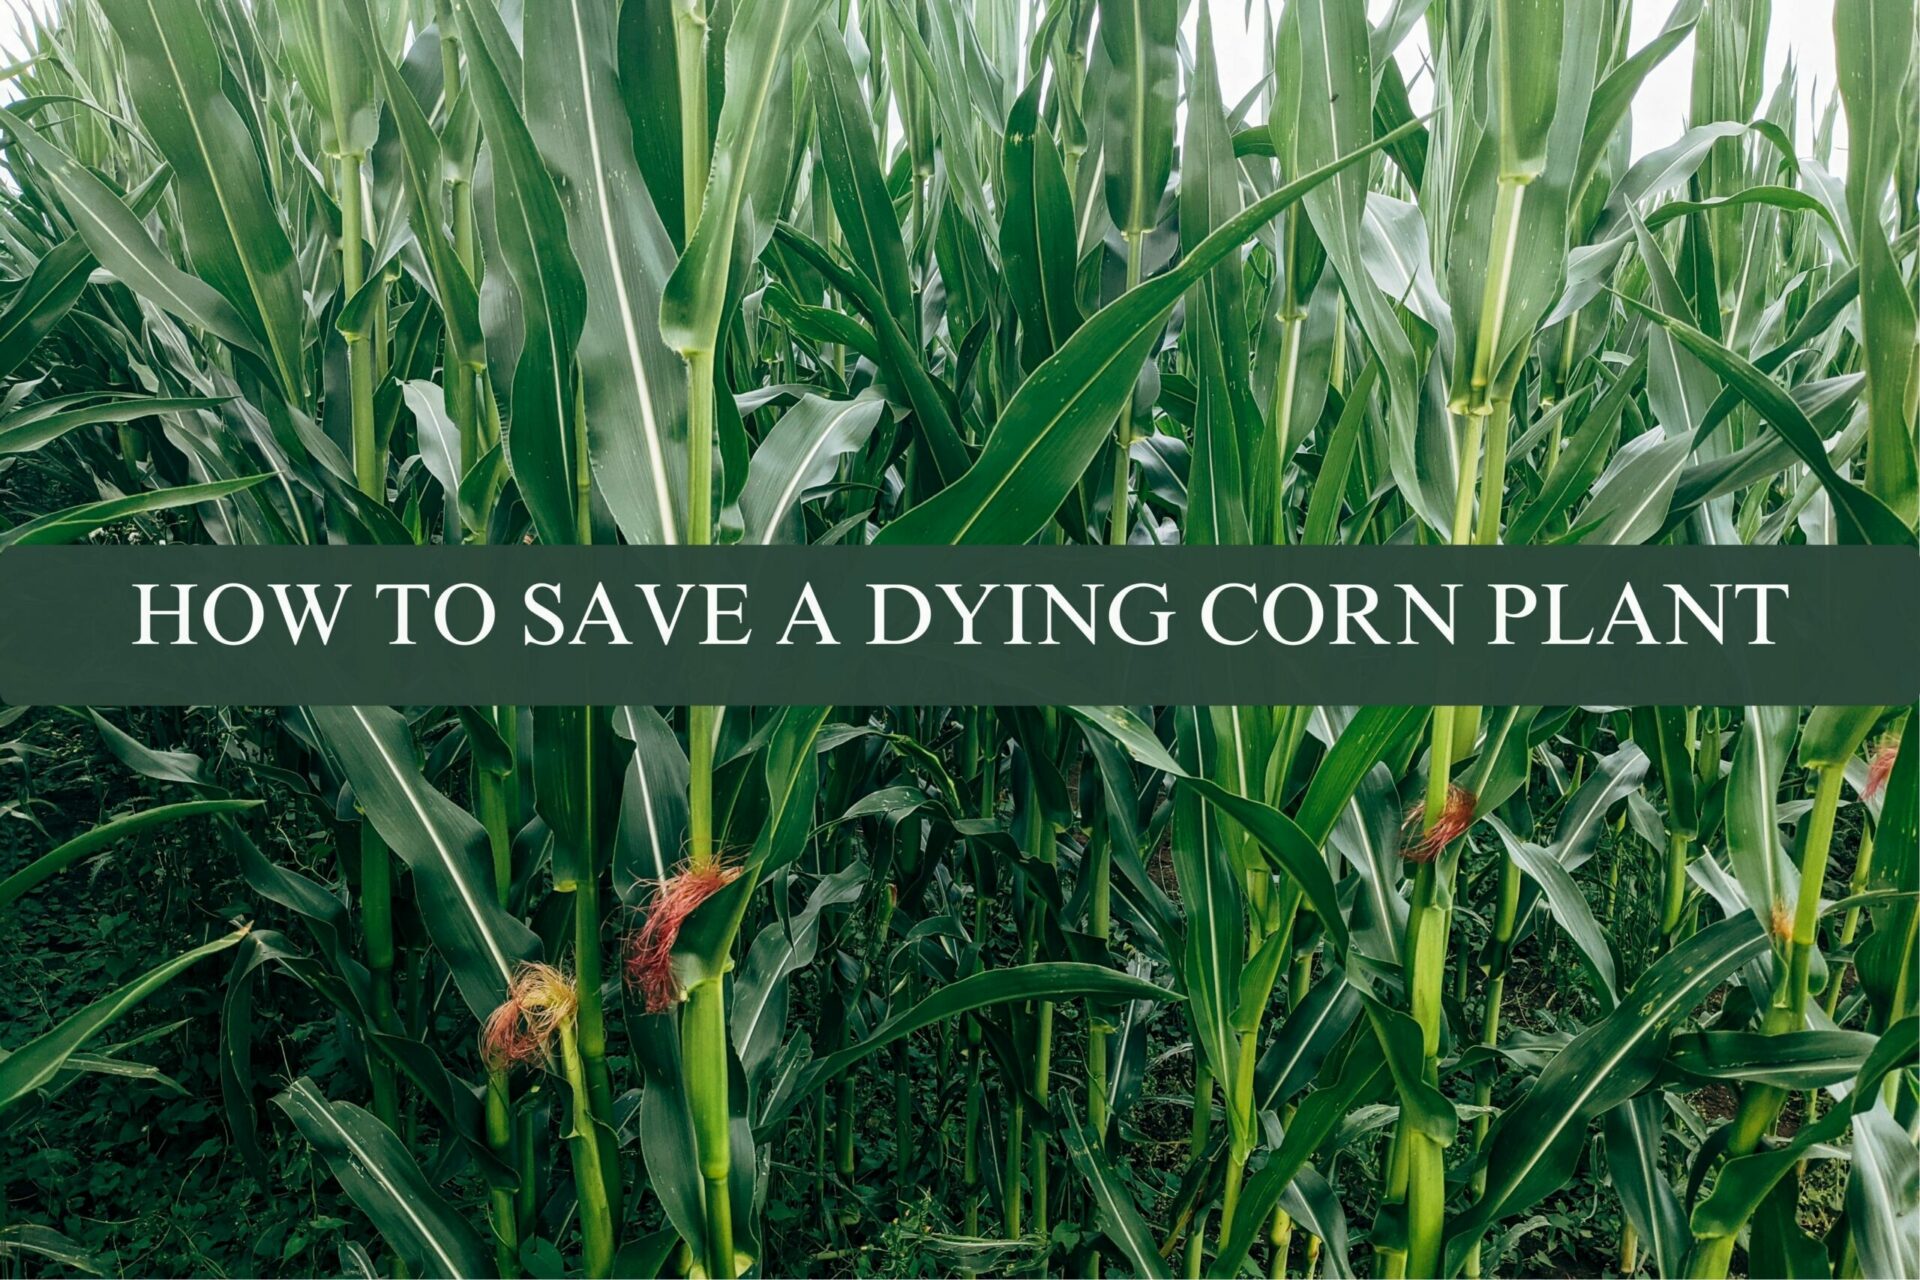 HOW TO SAVE A DYING CORN PLANT